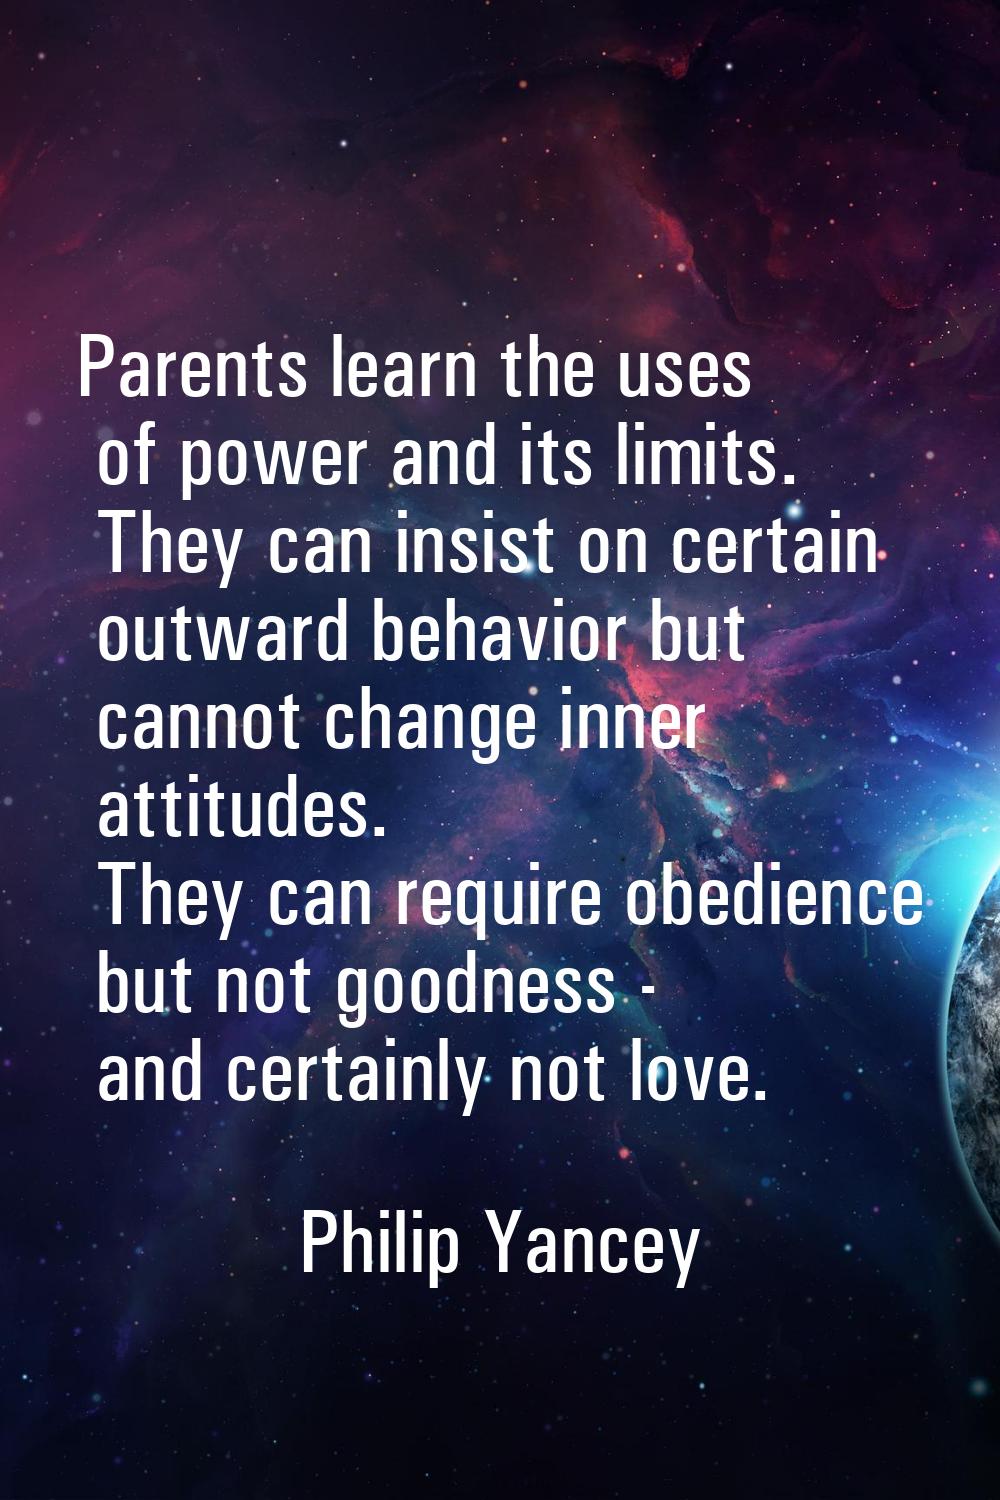 Parents learn the uses of power and its limits. They can insist on certain outward behavior but can